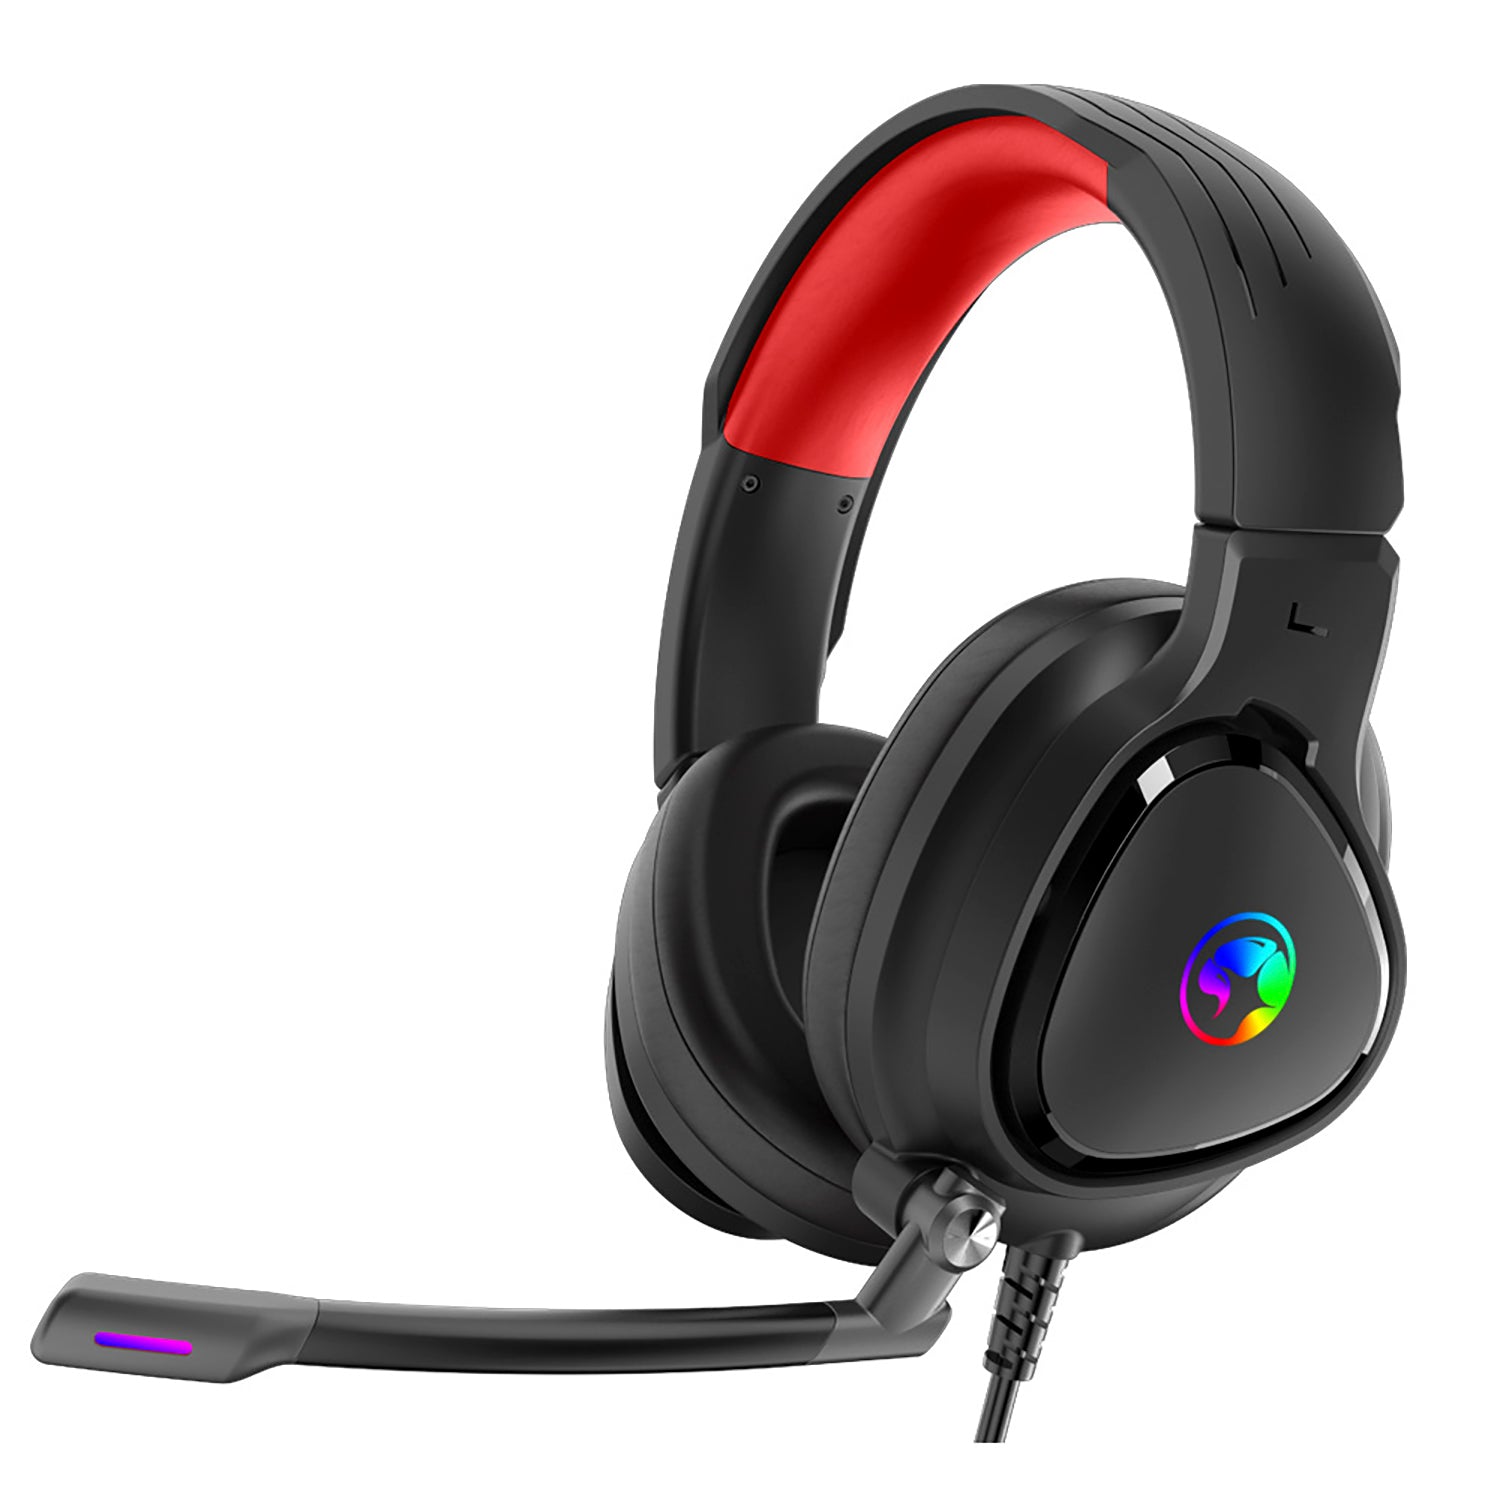 Marvo HG8958 USB 2.0 Drivers 40mm Gaming Headsets with MarvoTech Stereo 